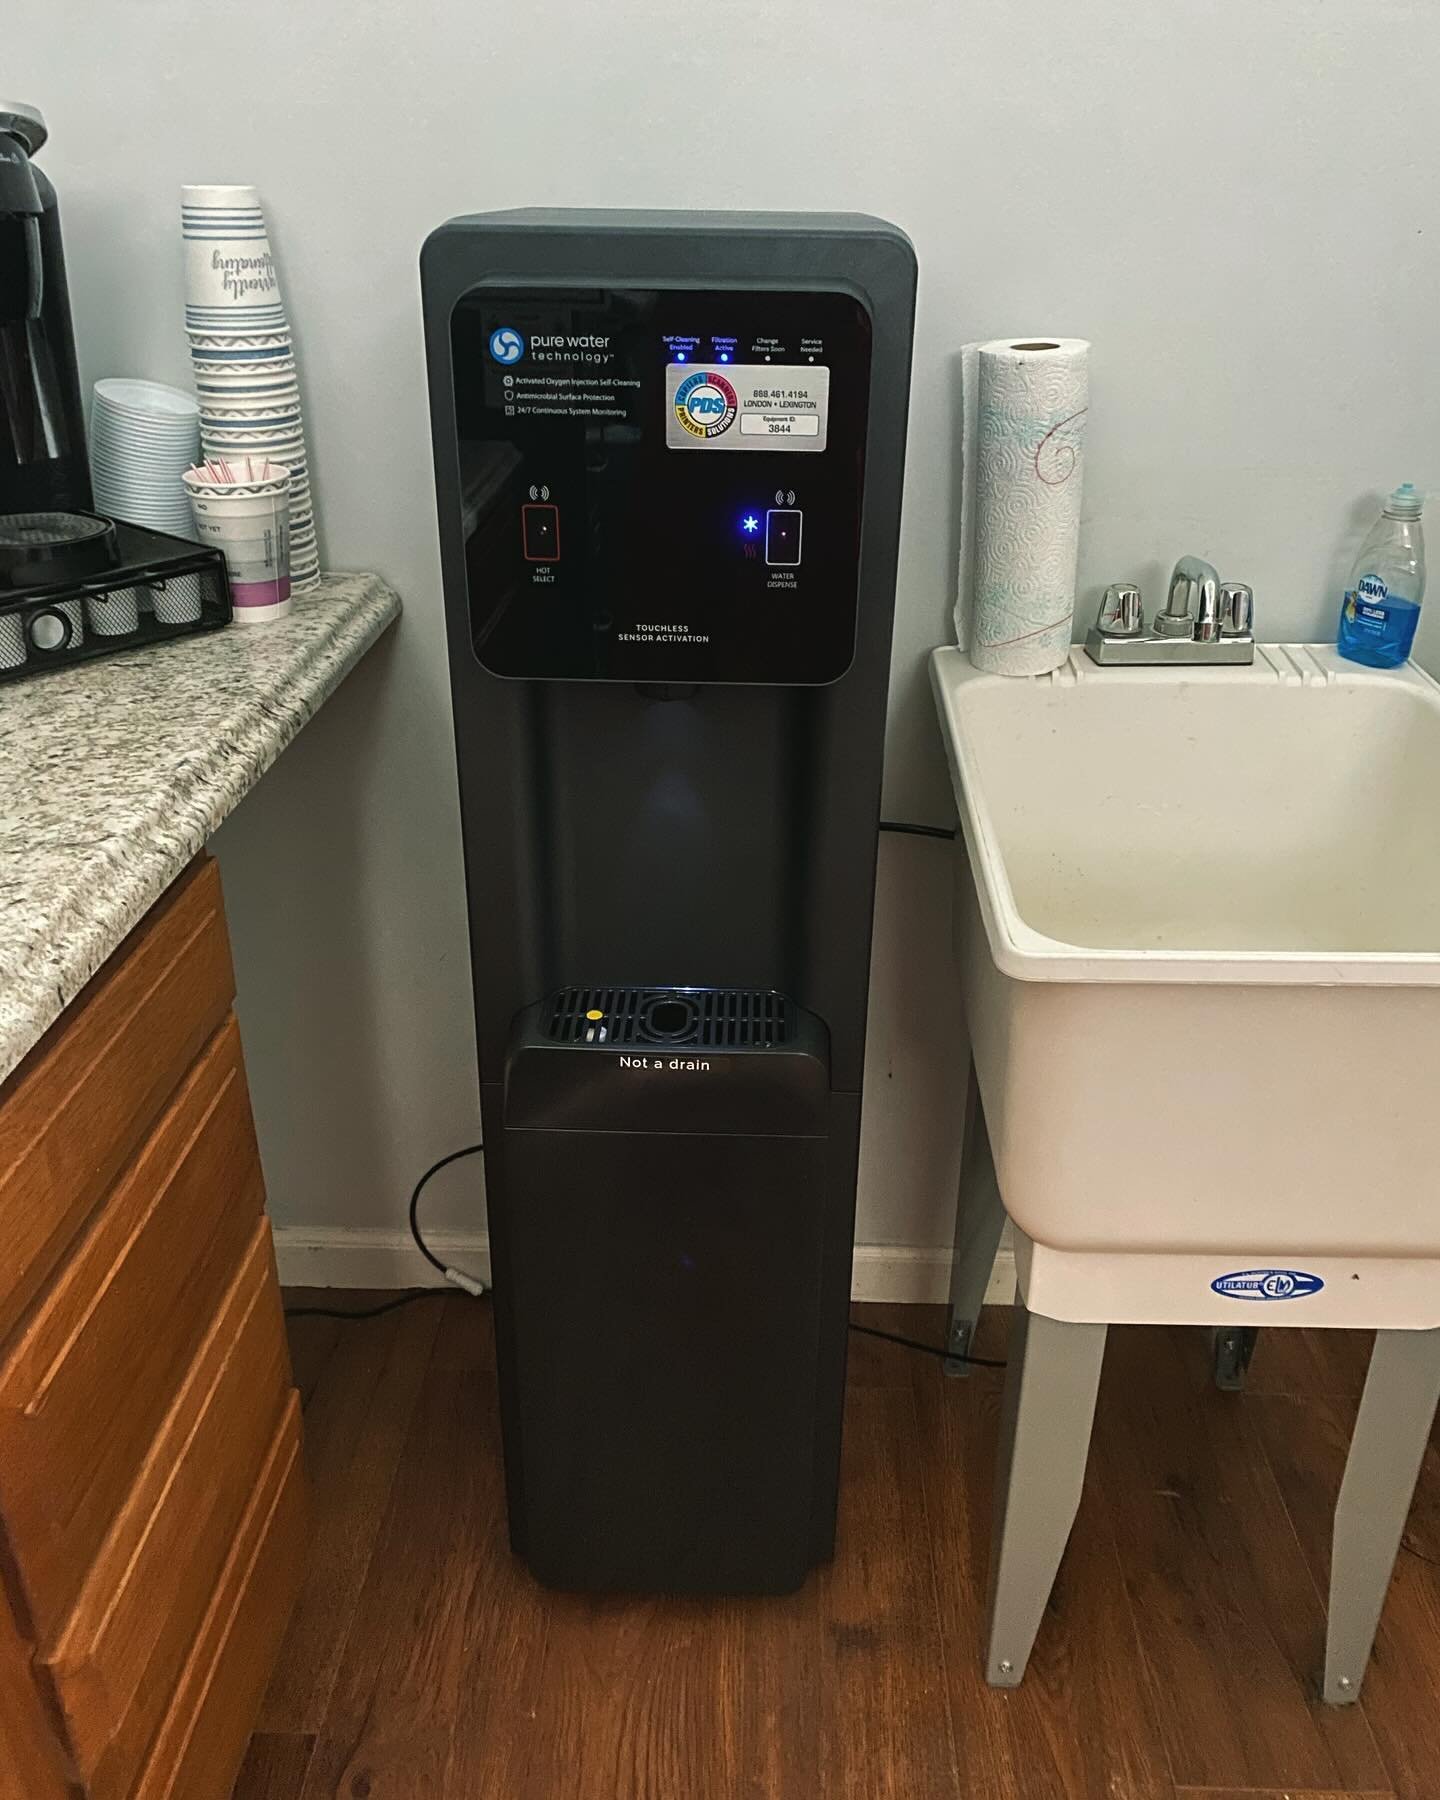 Our newest members hooked us up with our new water filtration system! Thanks to @purewaterky for the awesome customer service and an amazing product! Check them out for your office!